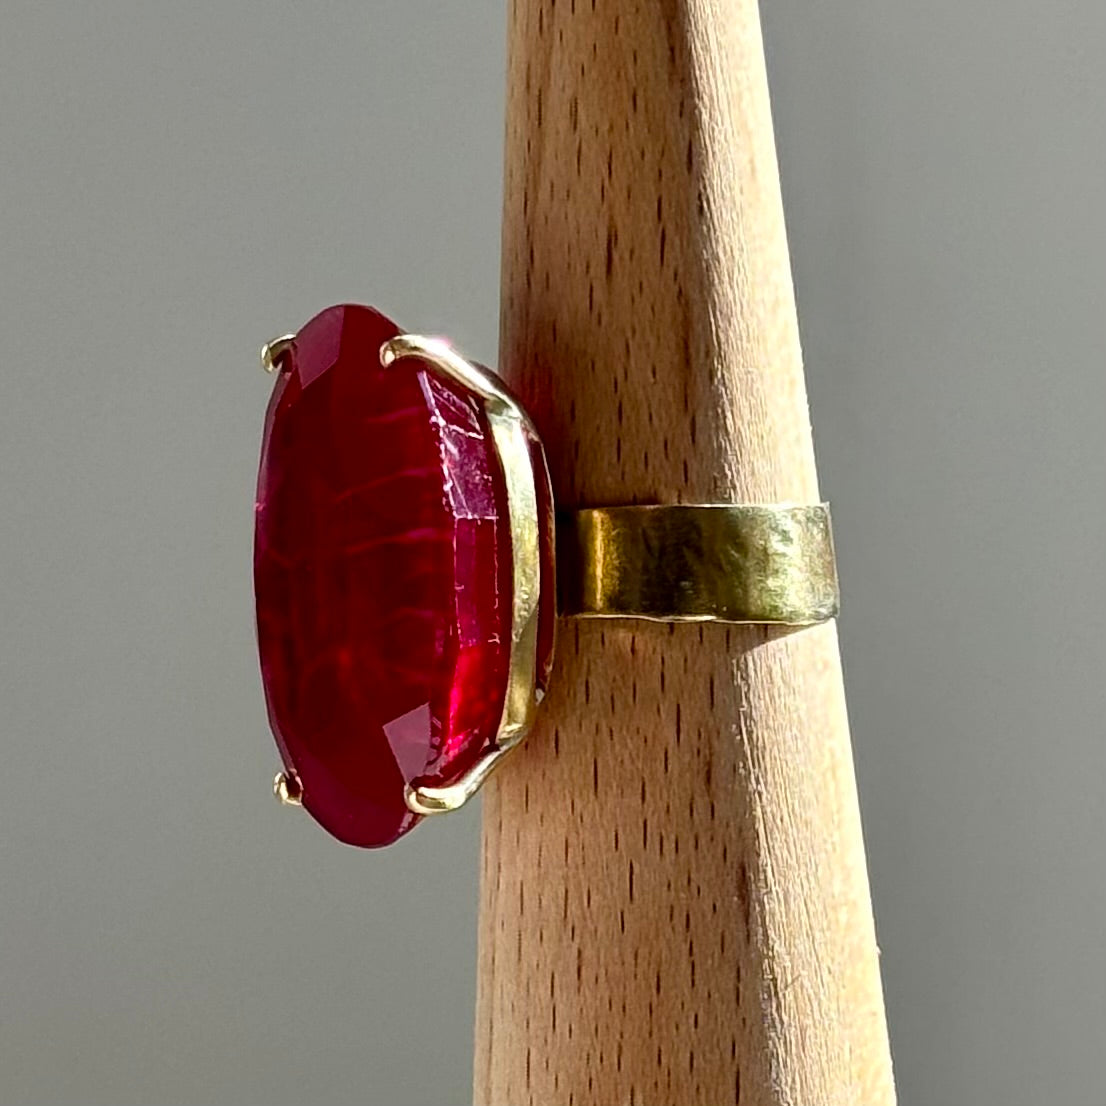 A short video Clip of an 18k Yellow Gold Rubellite Ring, Large Oval Rubellite and wide band on a wooden accessory